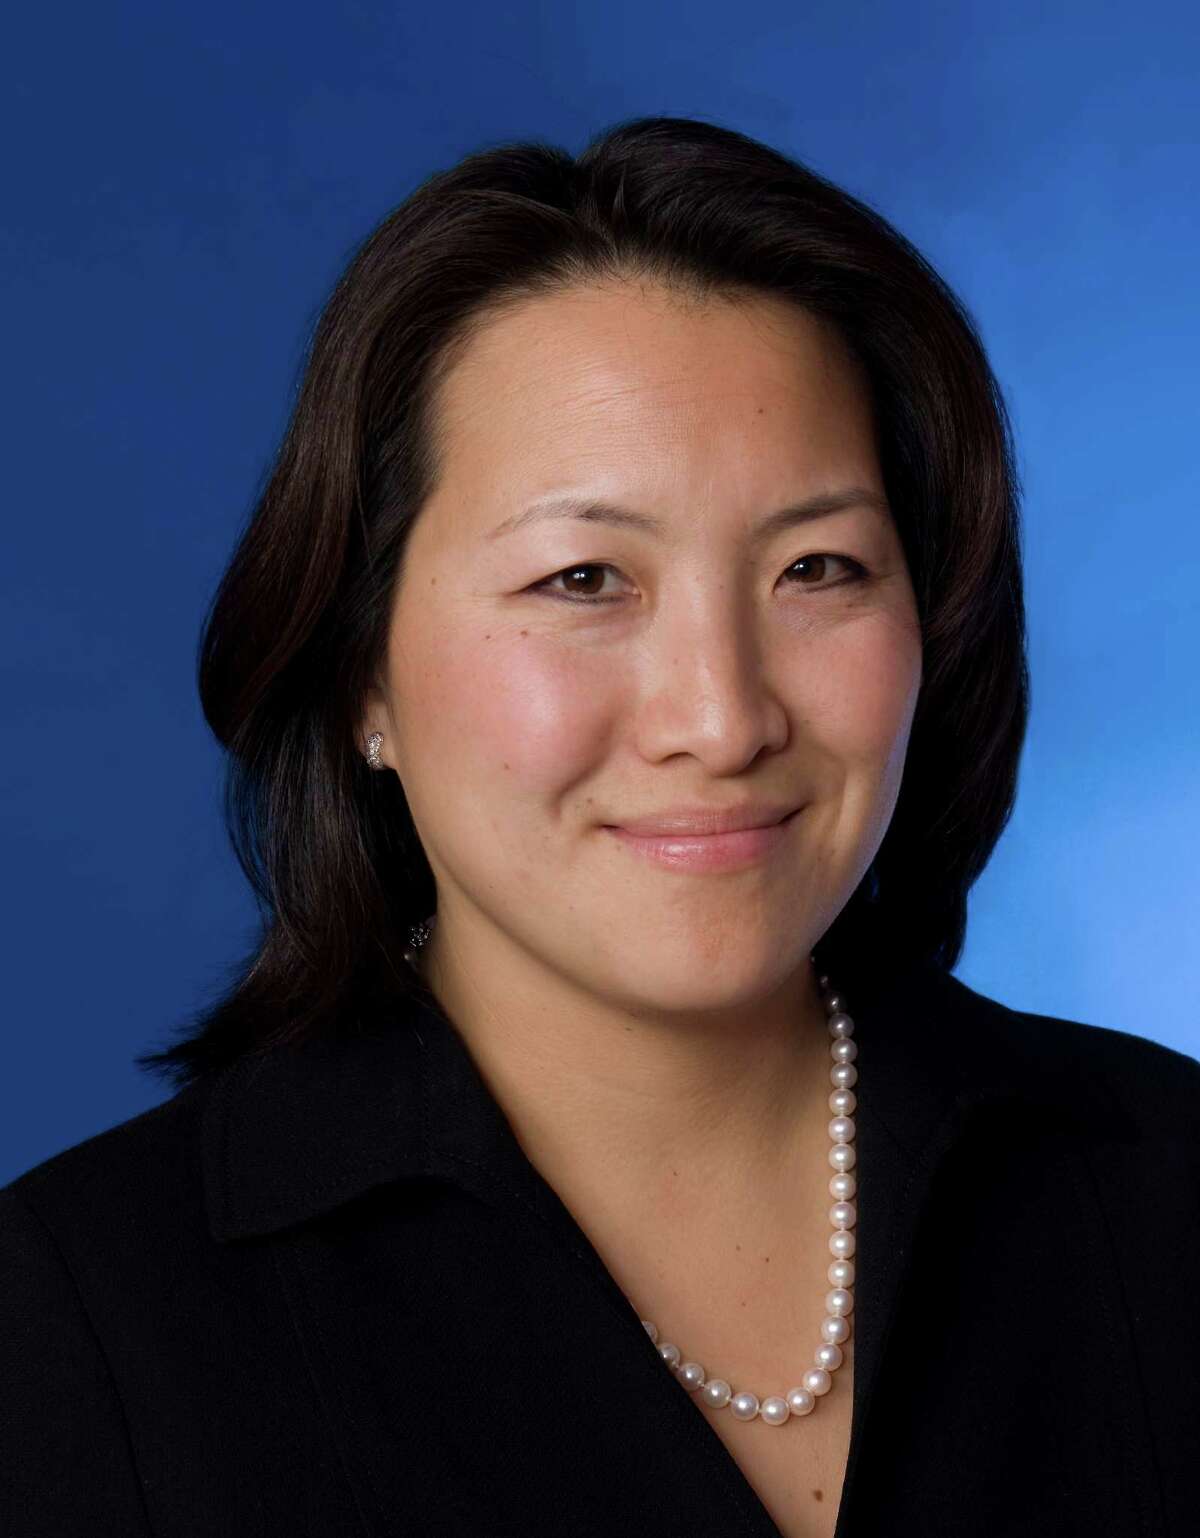 Julie Min Chayet has joined U.S. Trust as a senior vice president and market trust director. Chayet, a Weston resident, will have oversight for the county and will be based in the firm's Stamford office. Prior to joining U.S. Trust, she was a managing director at Fiduciary Trust International. Prior to joining Fiduciary Trust, Chayet practiced law in both New York and Connecticut specializing in estate planning and settlement and provided advice on philanthropic endeavors for corporations, nonprofit institutions and individuals. She is a member of the Connecticut and New York State bar associations and the National Asian Pacific American Bar Association.